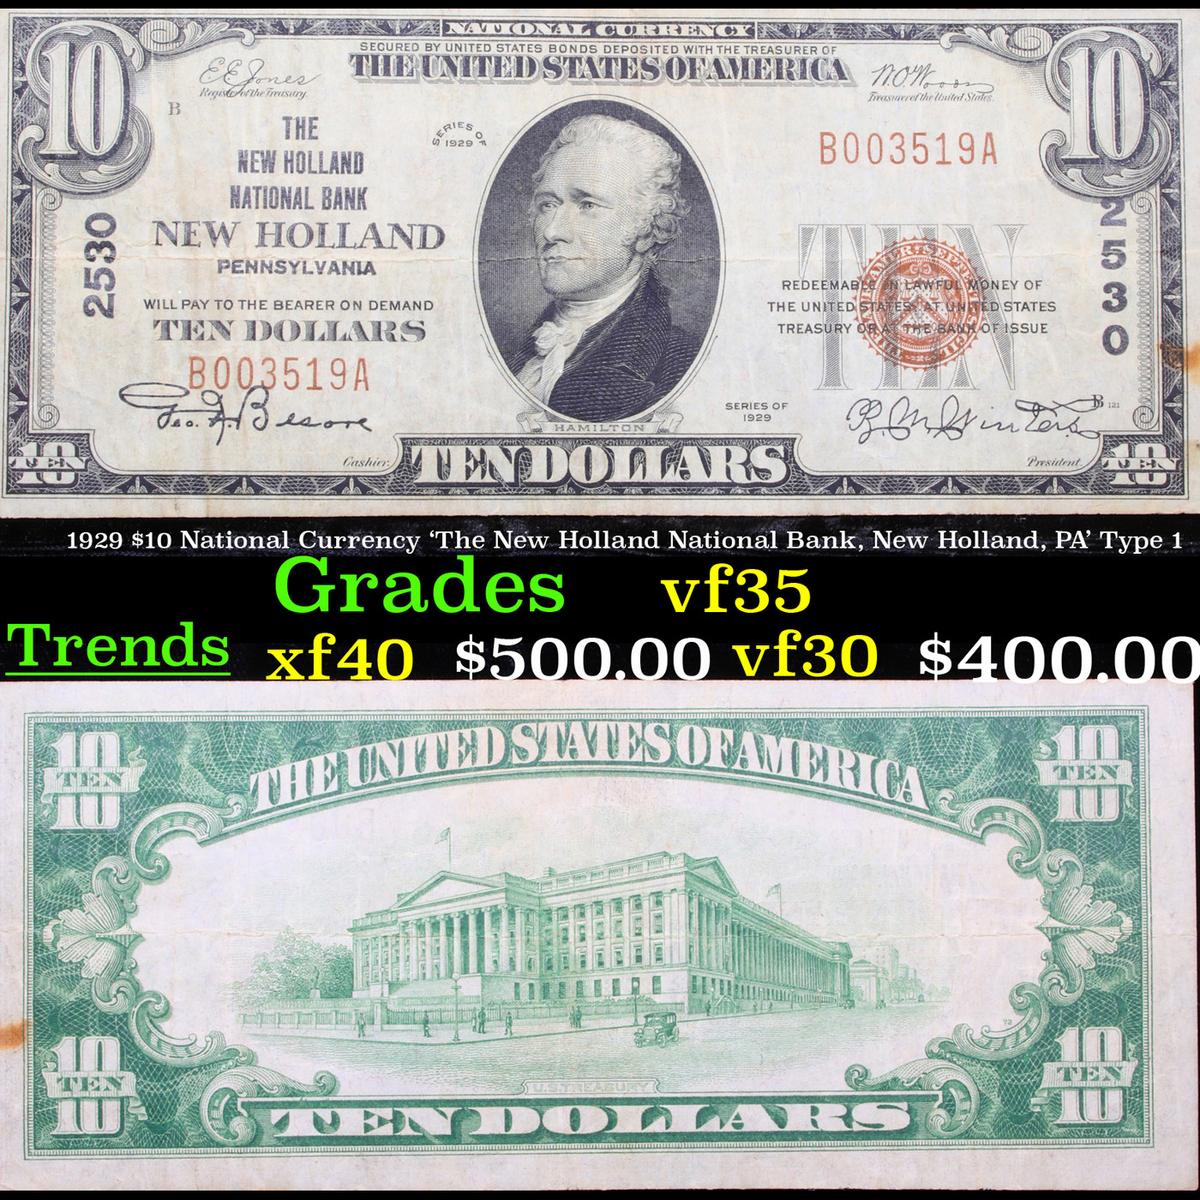 1929 $10 National Currency 'The New Holland National Bank, New Holland, PA' Type 1 Grades vf++